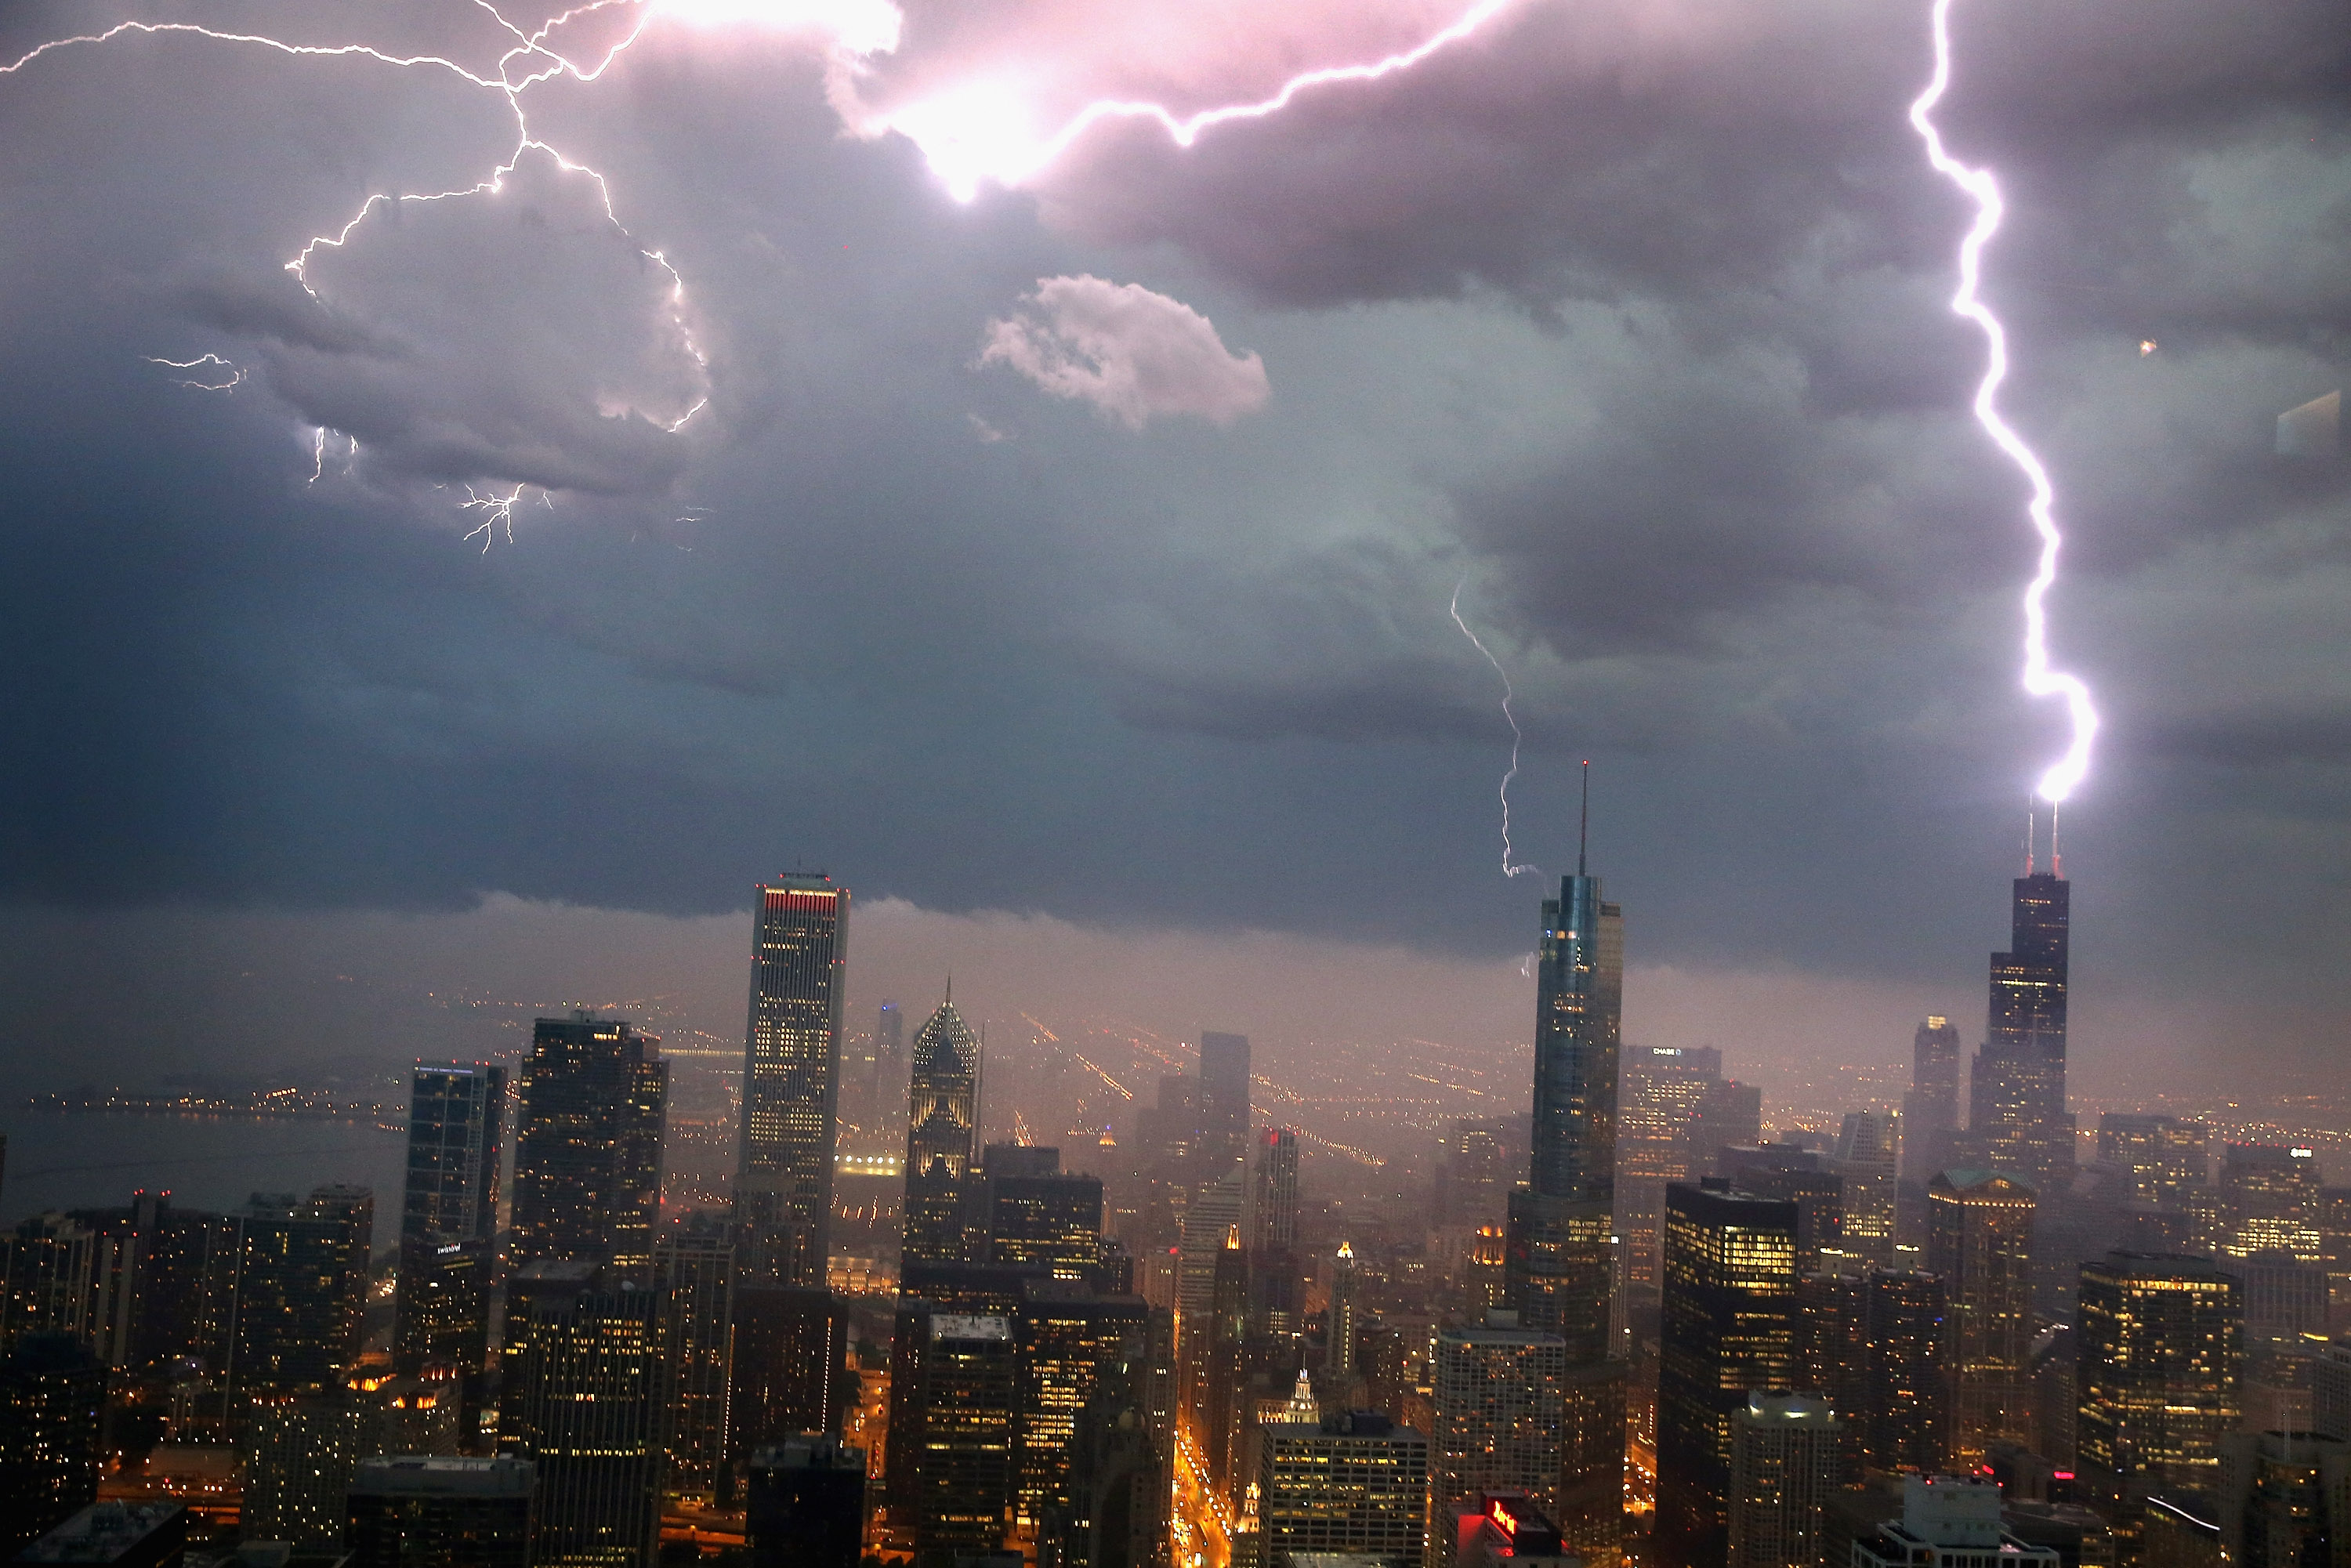 Lightning in Chicago on June 12, 2013 (Photo by Scott Olson/Getty Images)